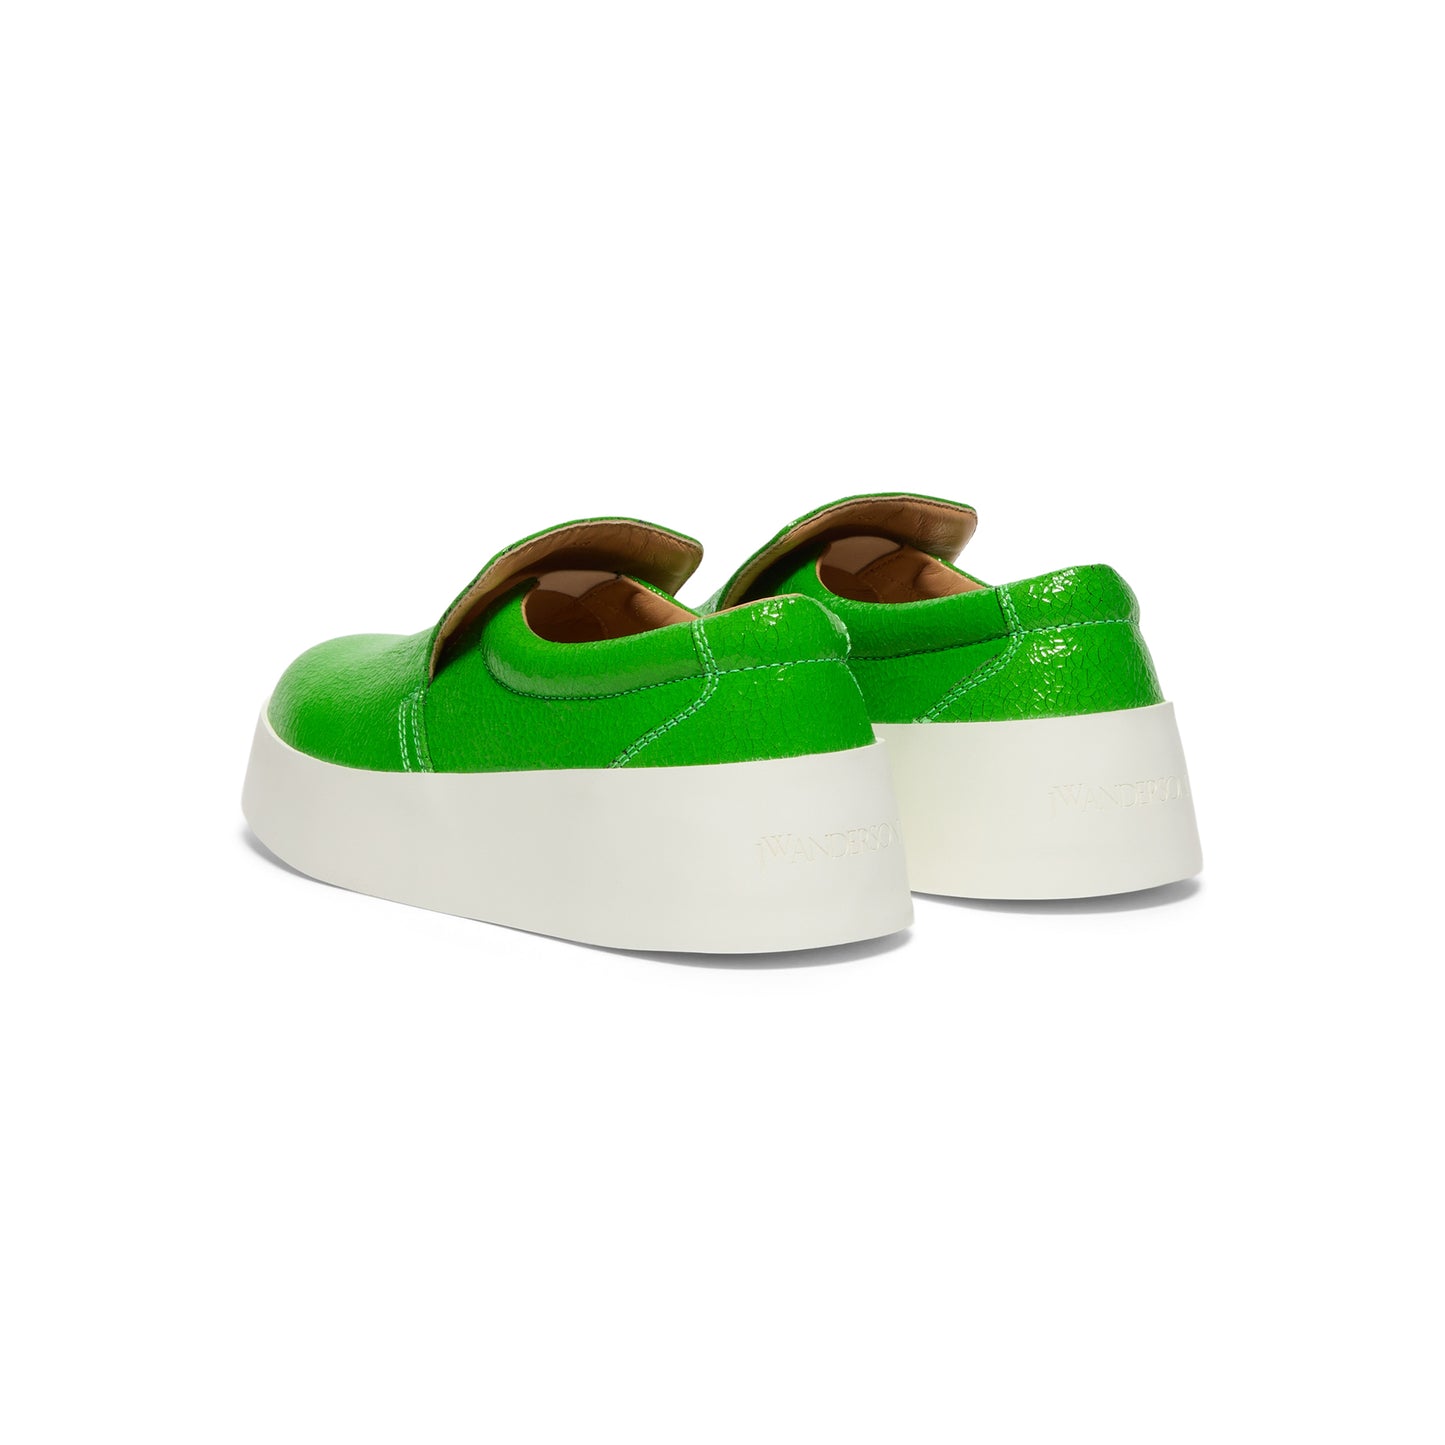 JW Anderson Cracked Leather Slip On (Bright Green)